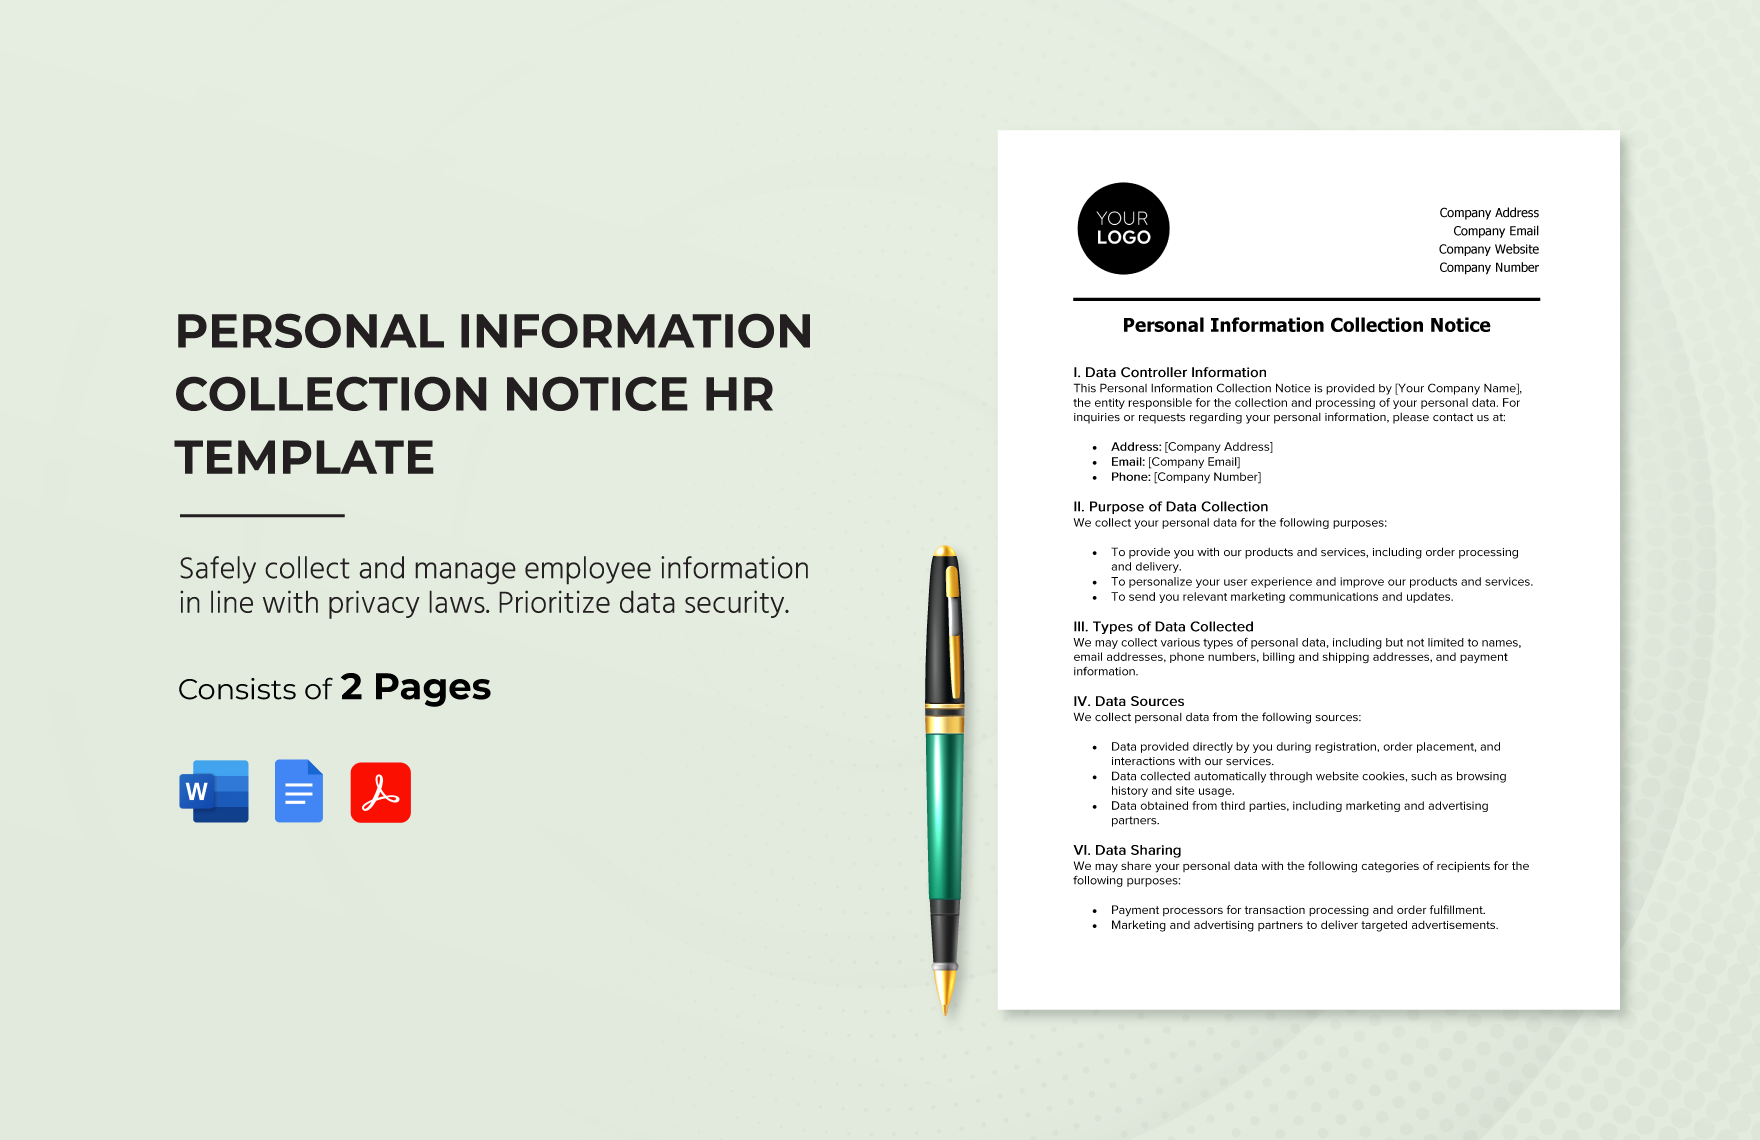 Personal Information Collection Notice HR Template